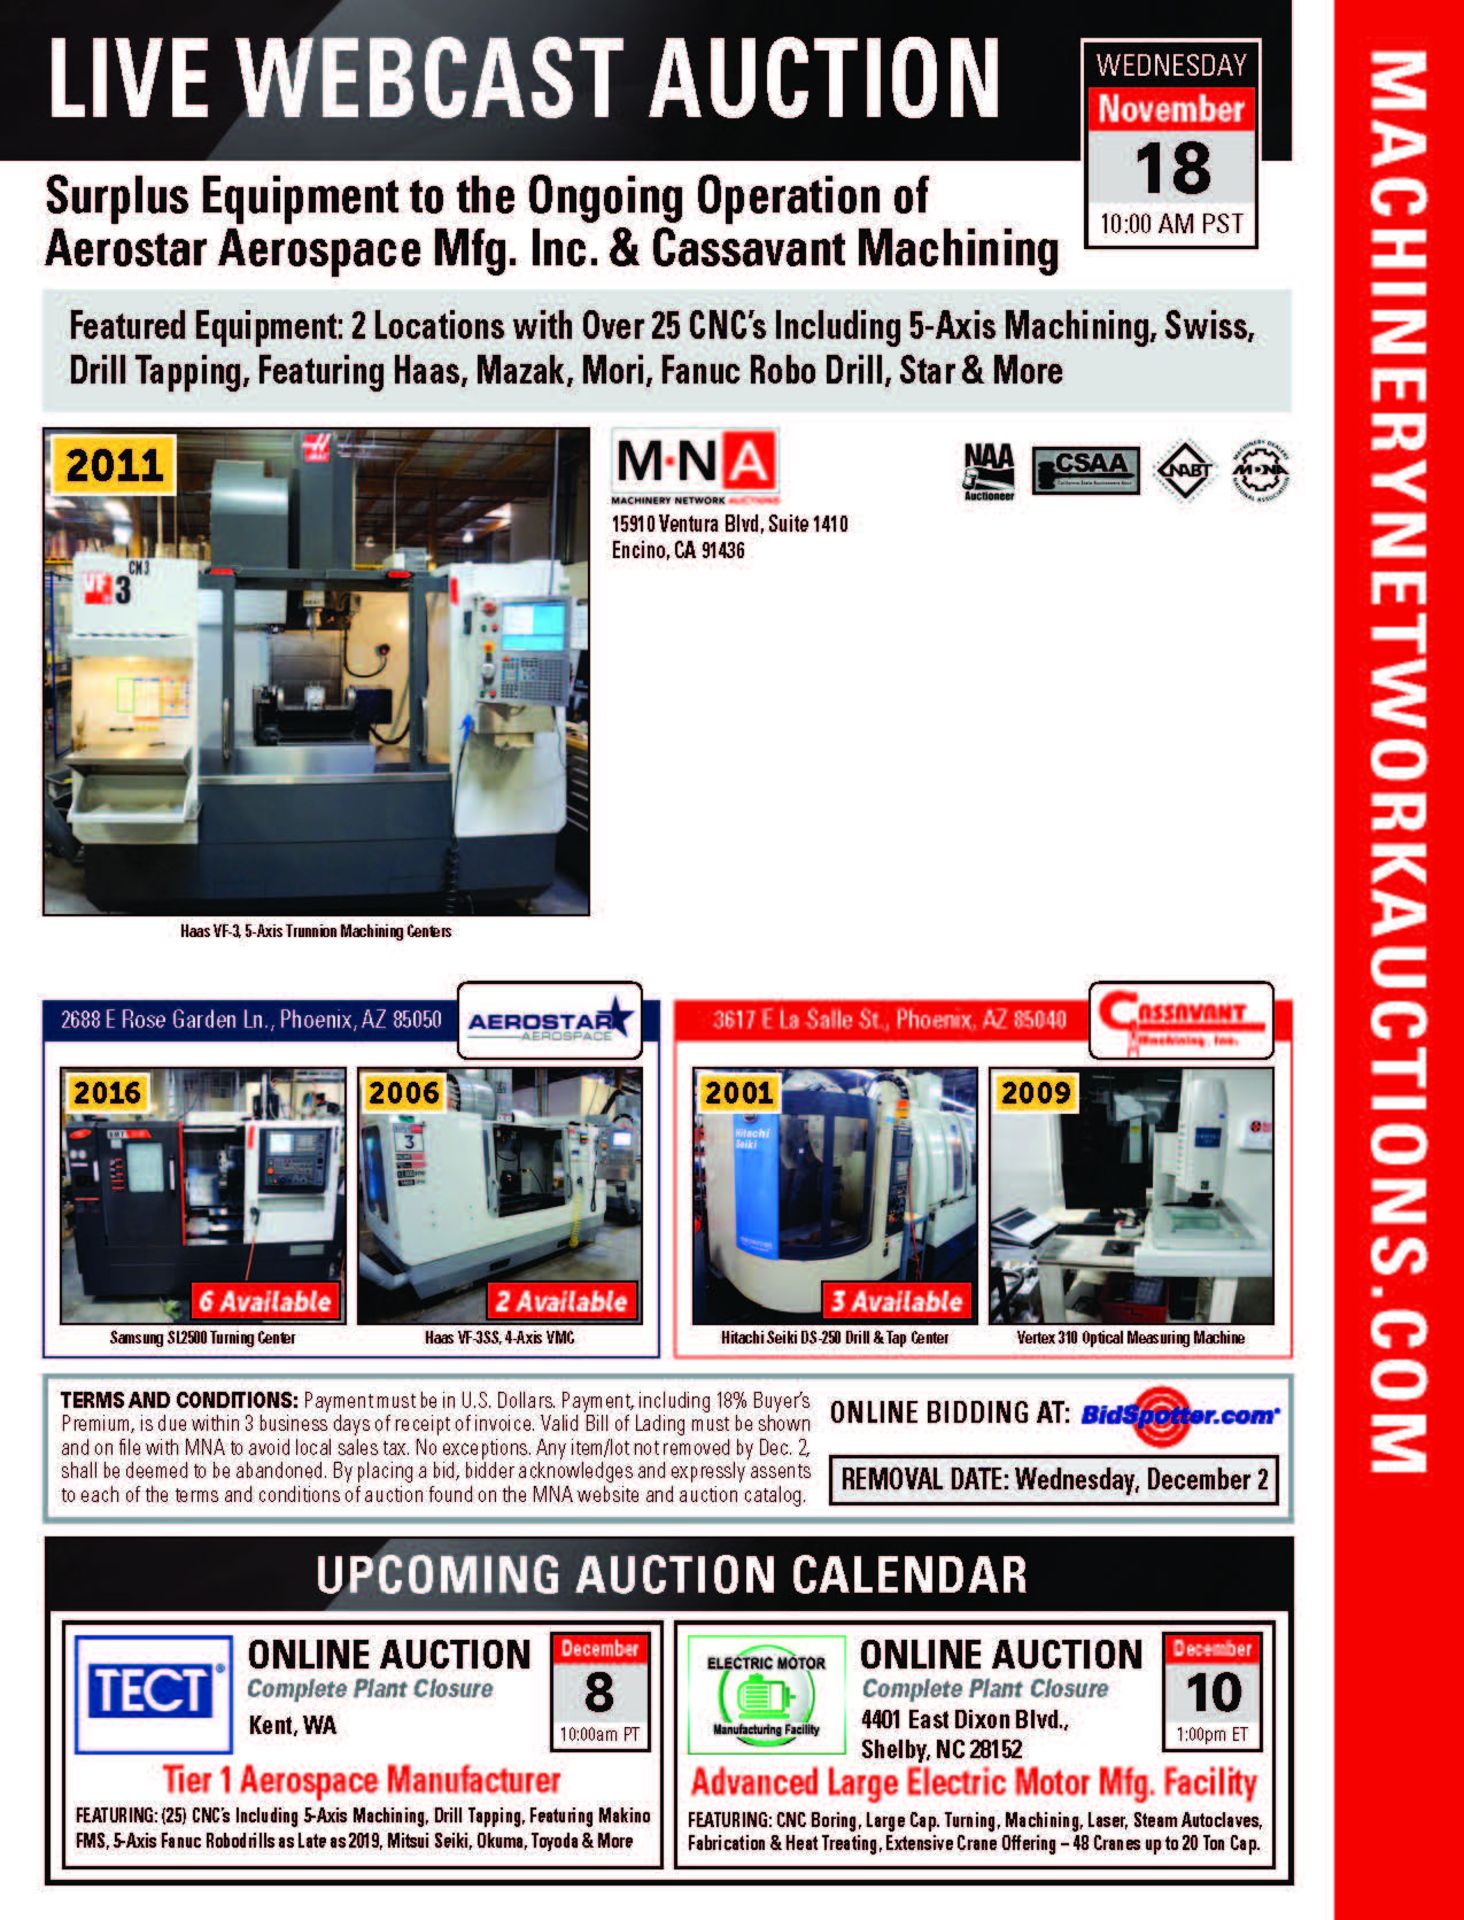 2 Locations with Over 25 CNC’s Including Haas 5-Axis Machining, Fanuc Robodrills, Star Swiss & More - Image 2 of 2